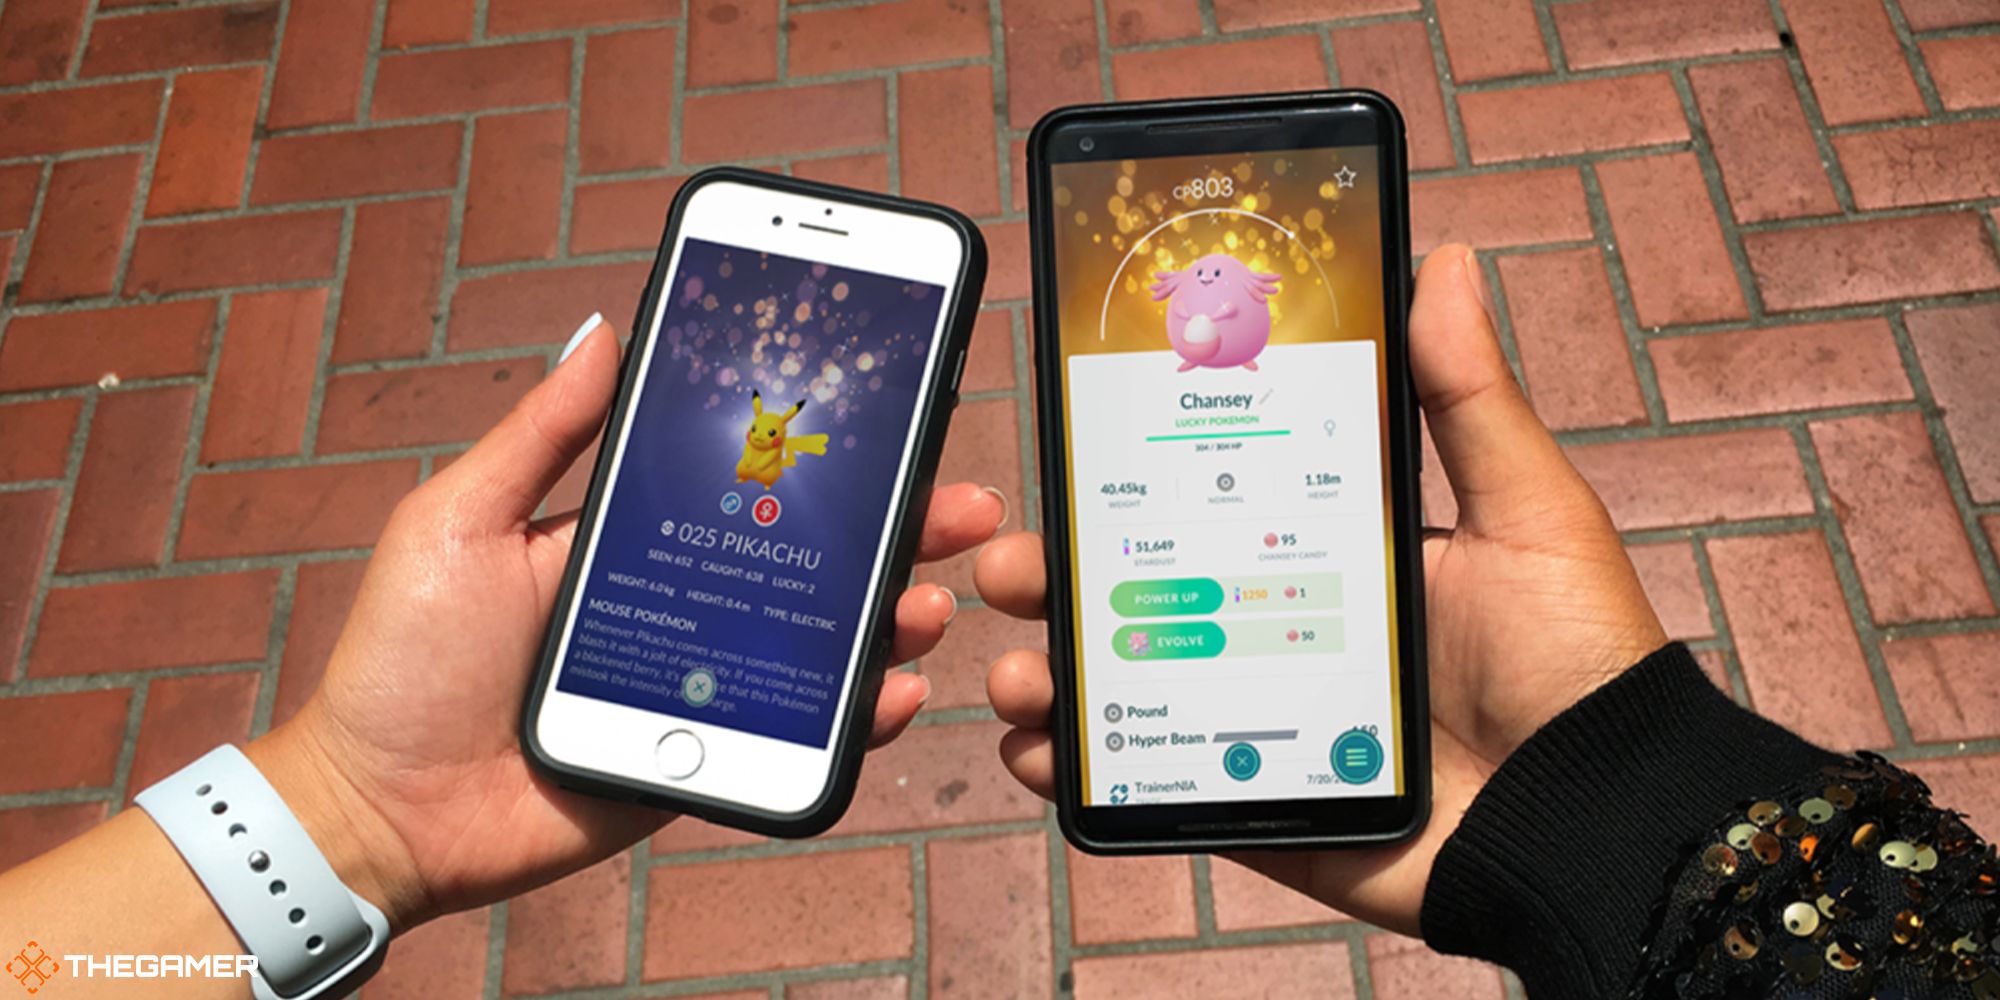 Pokemon Go - official image of trainers trading Pokemon